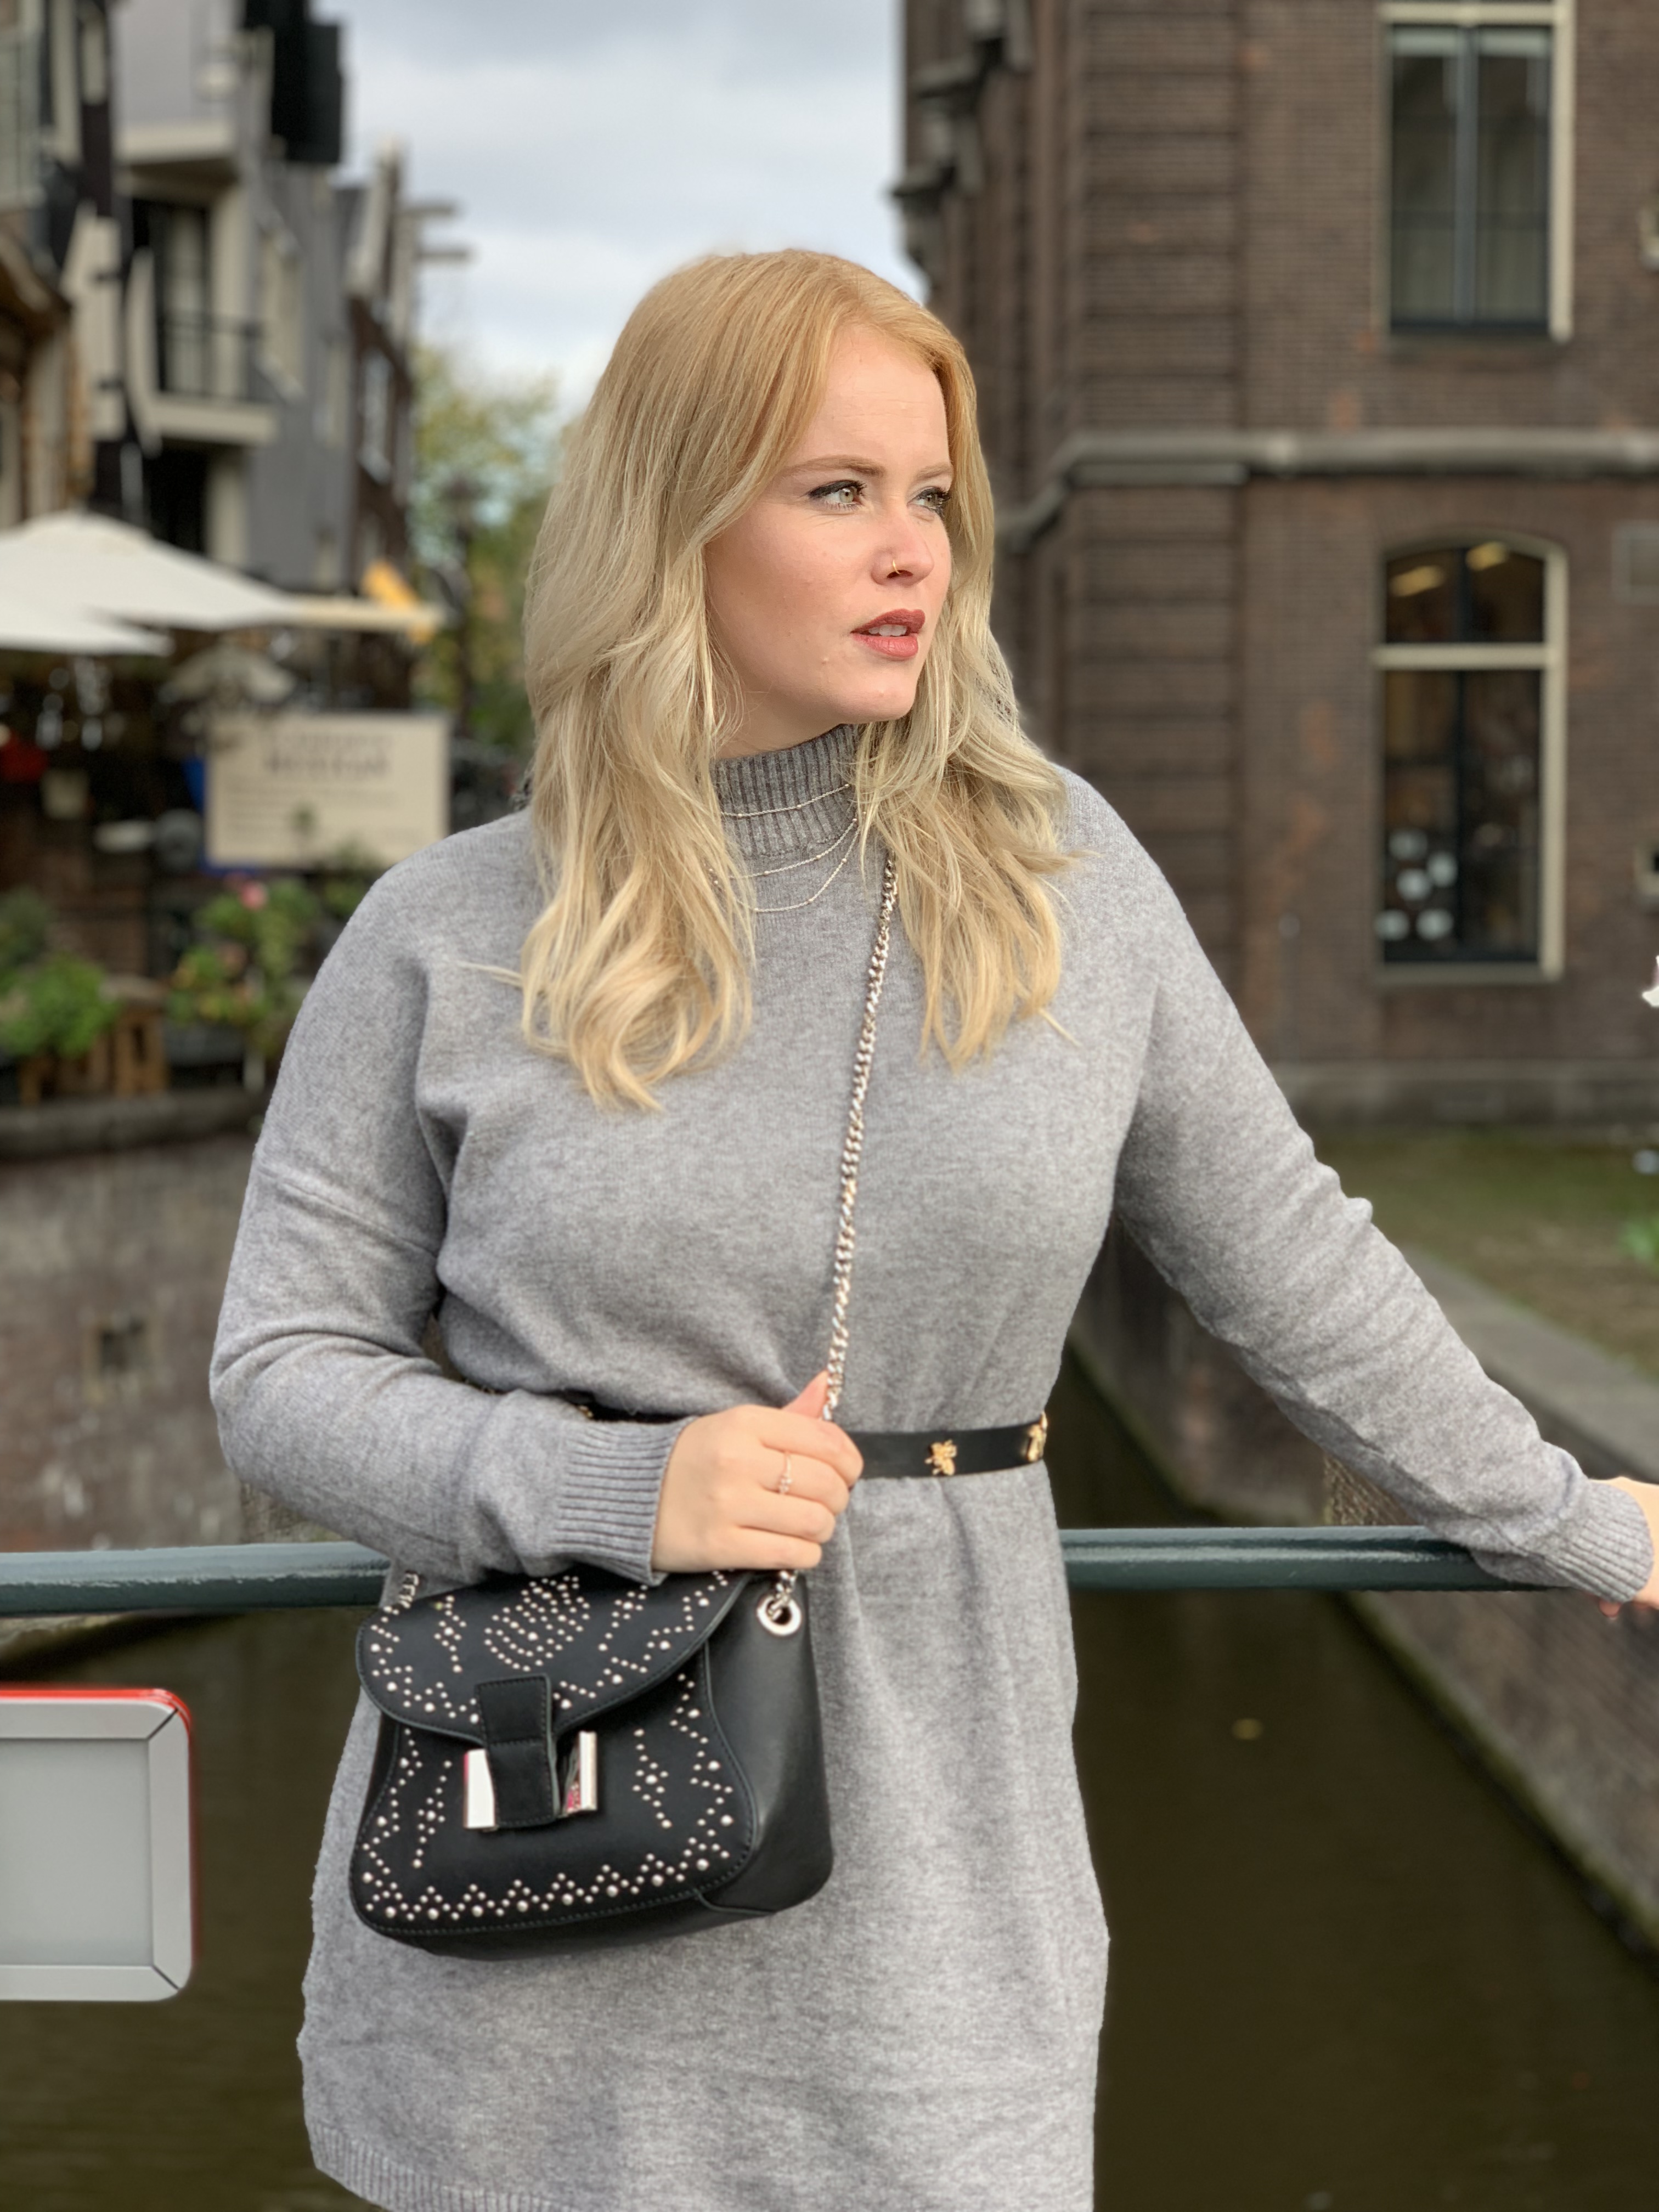 A day in Amsterdam in my big sweaterdress 